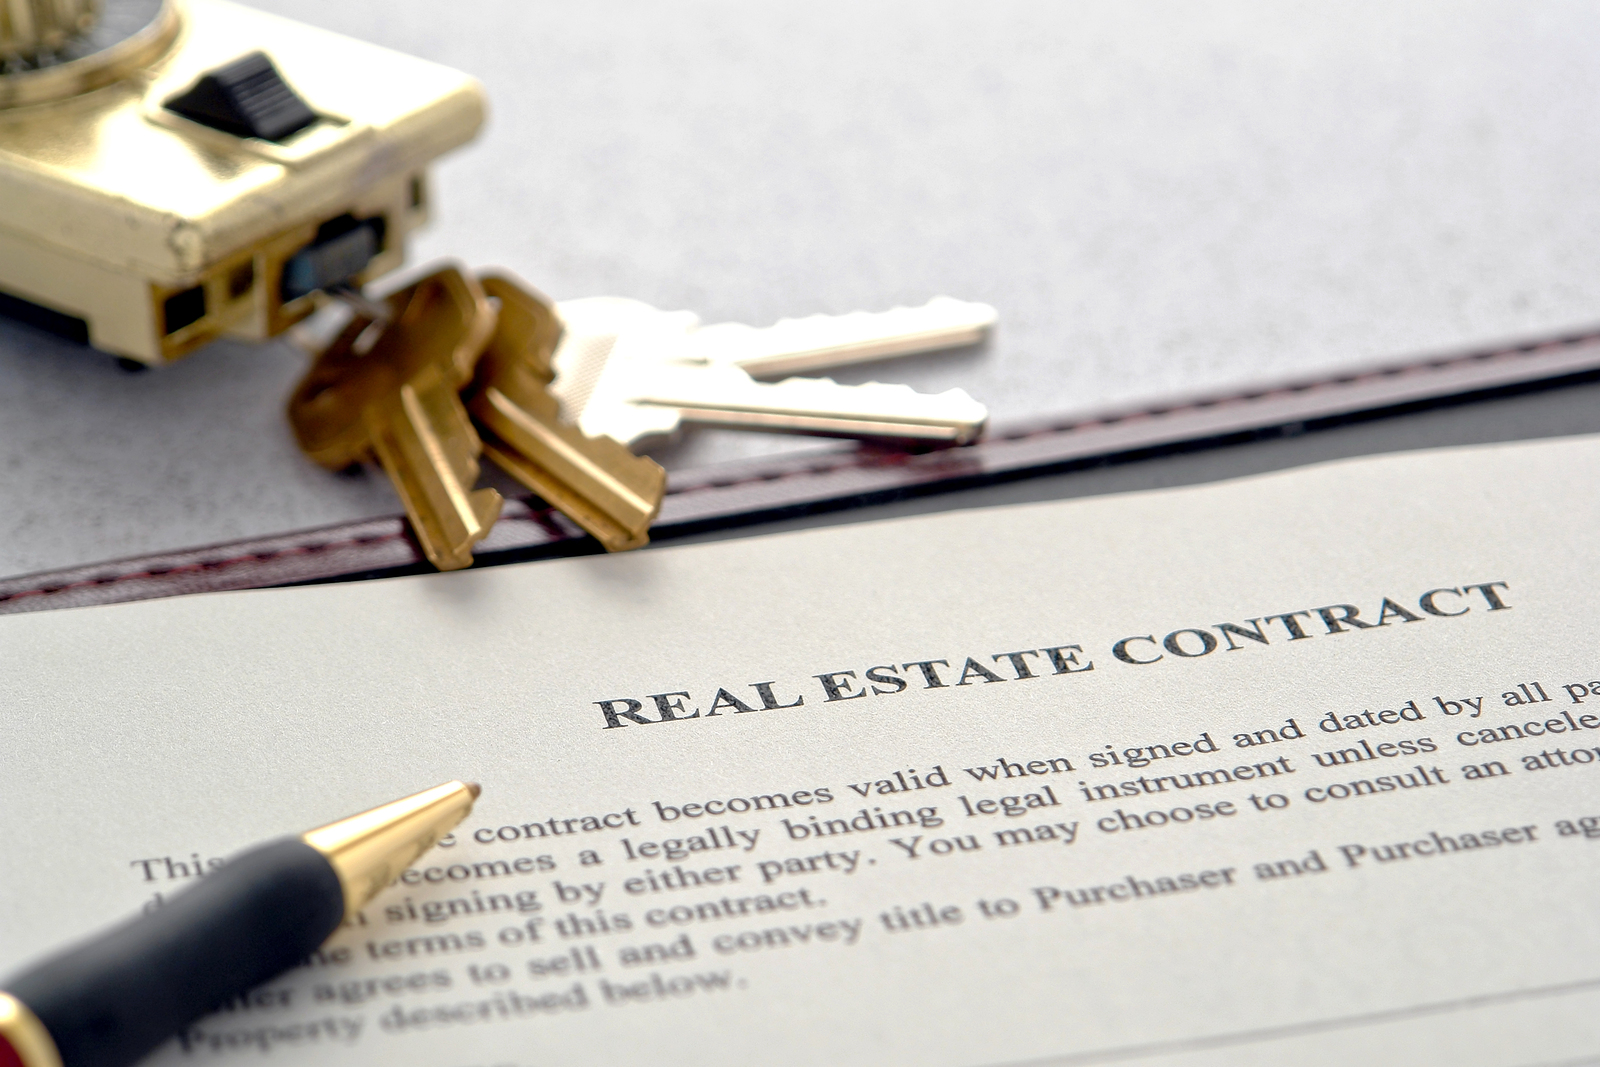 Real estate contract, pen, and house keys sitting on a table.